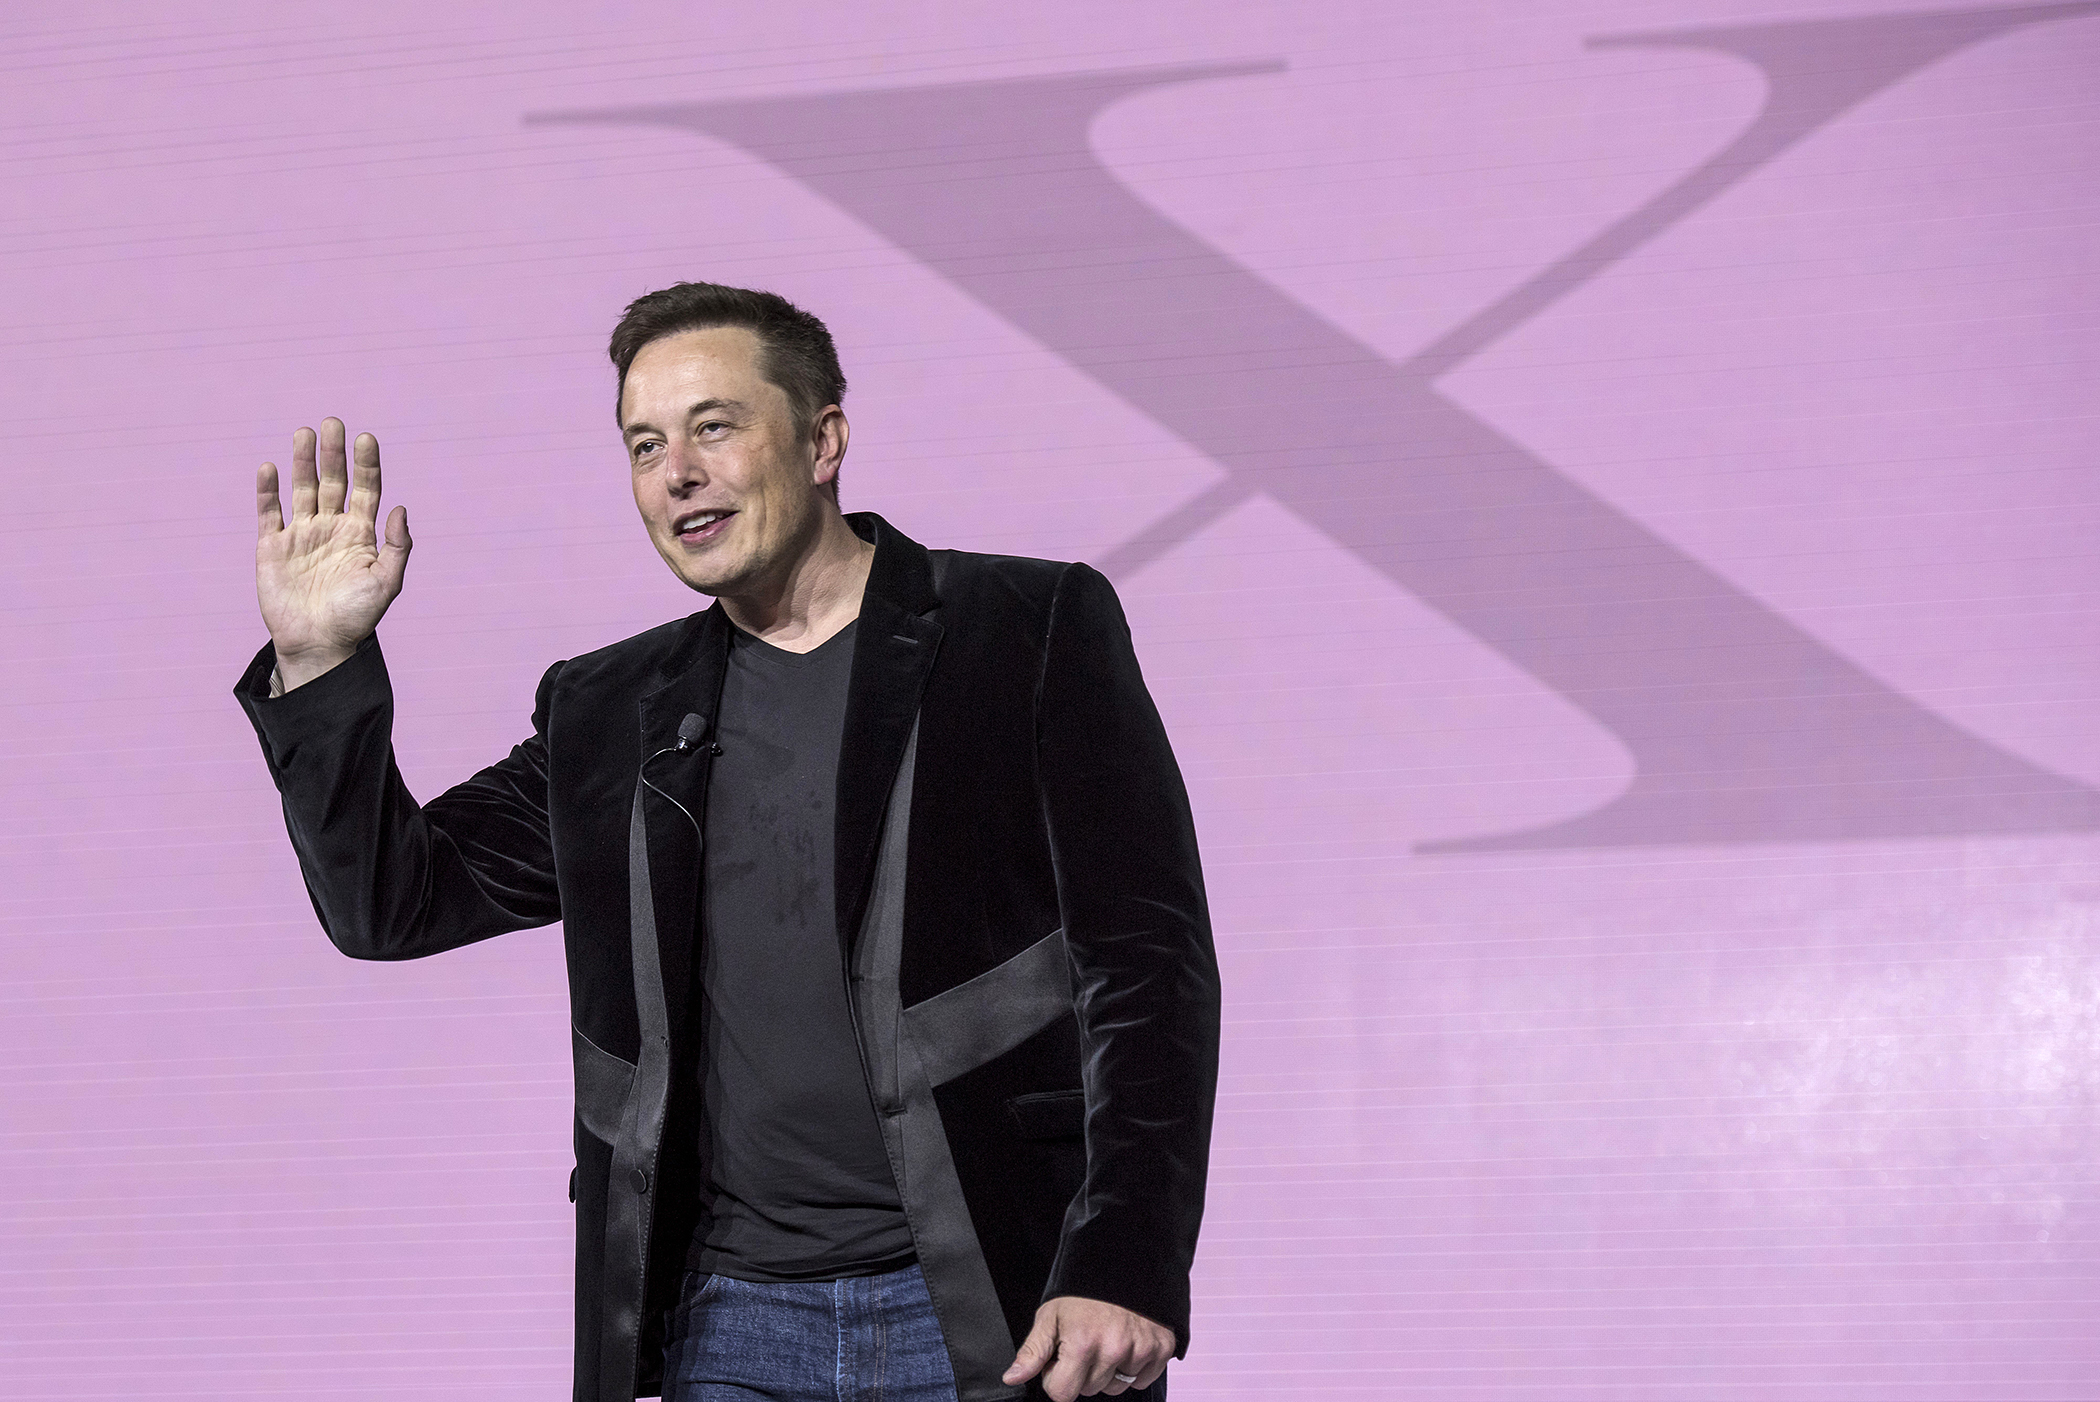 Elon Musk, chairman and chief executive officer of Tesla Motors Inc., gestures as he unveils the Model X sport utility vehicle (SUV) during an event in Fremont, California, on Sept. 29, 2015.